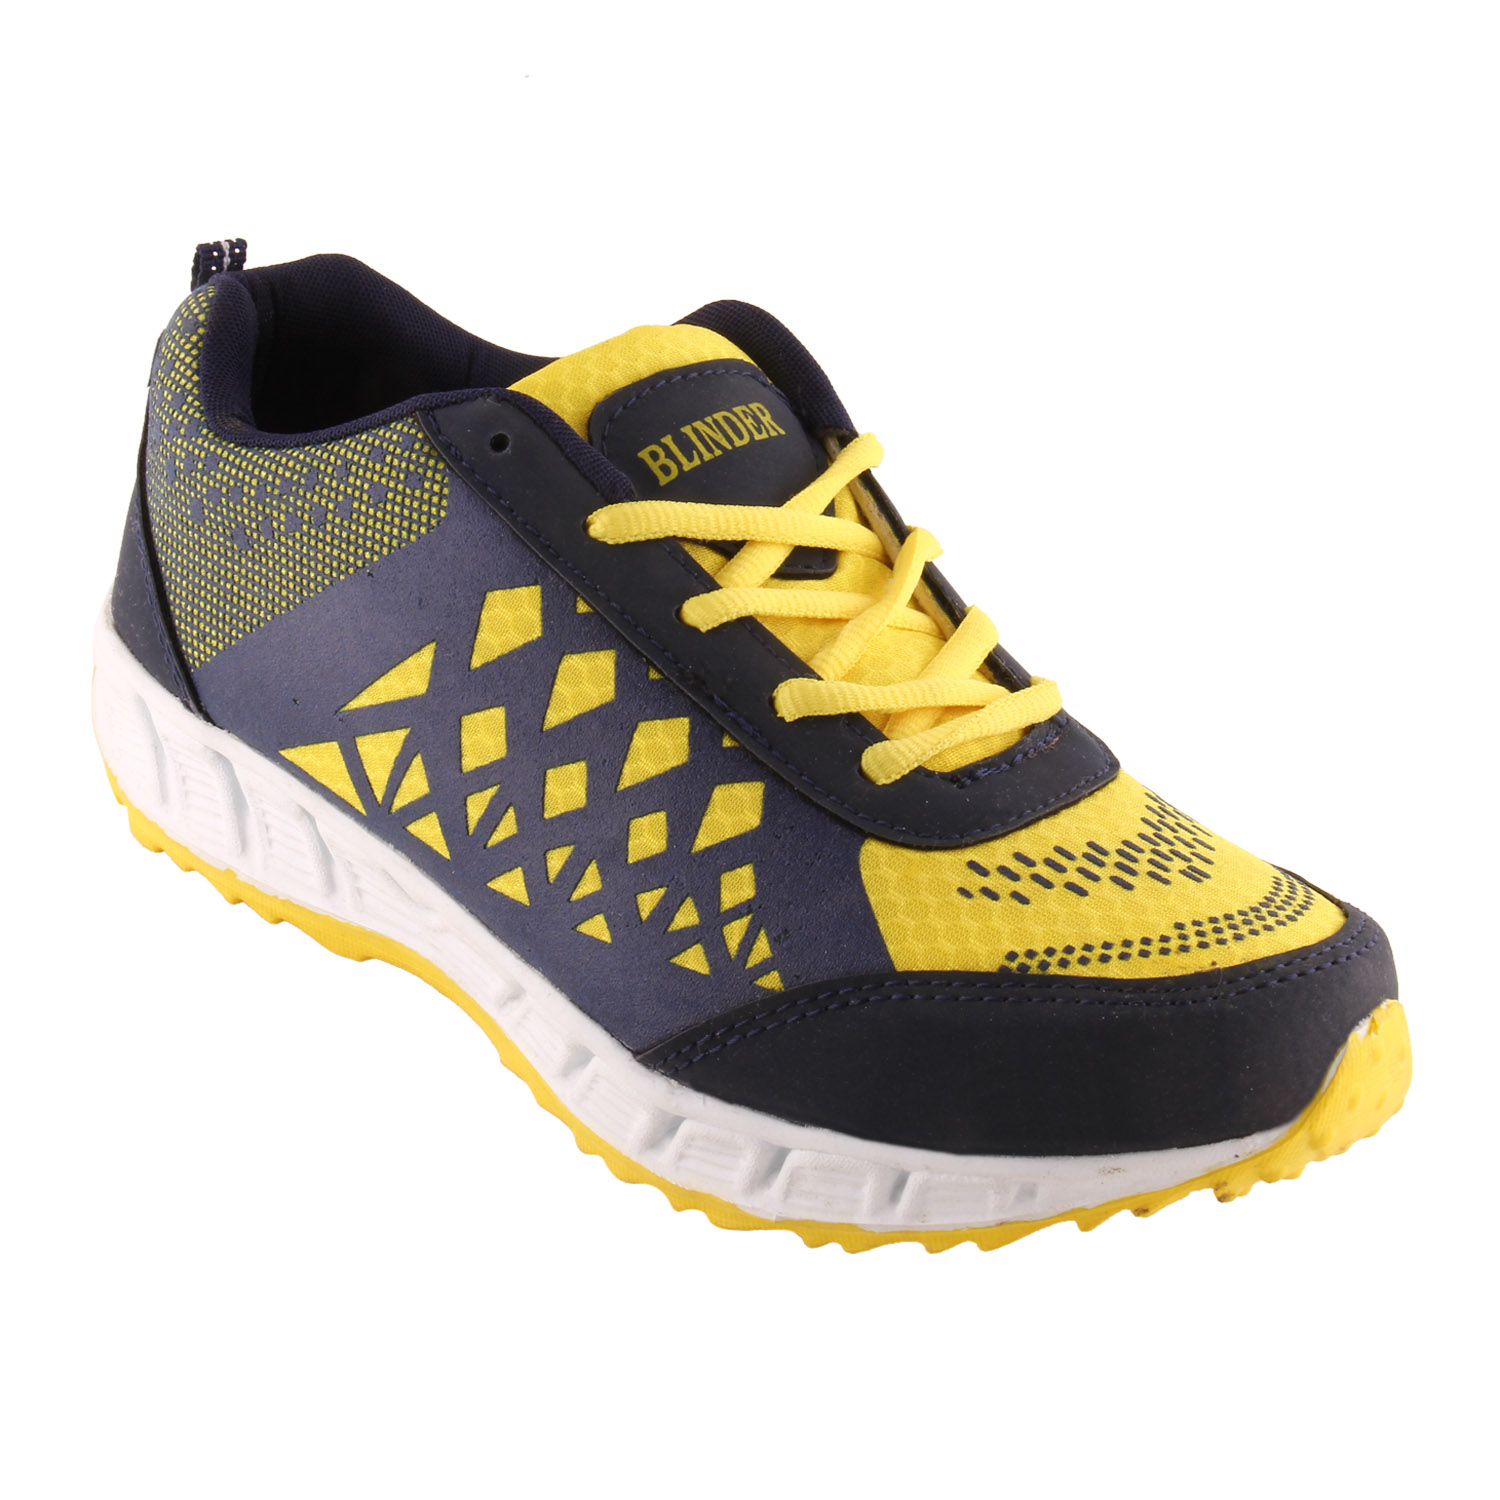 Buy BLINDER Yellow and Navy blue Sport Shoes Online @ ₹499 from ShopClues